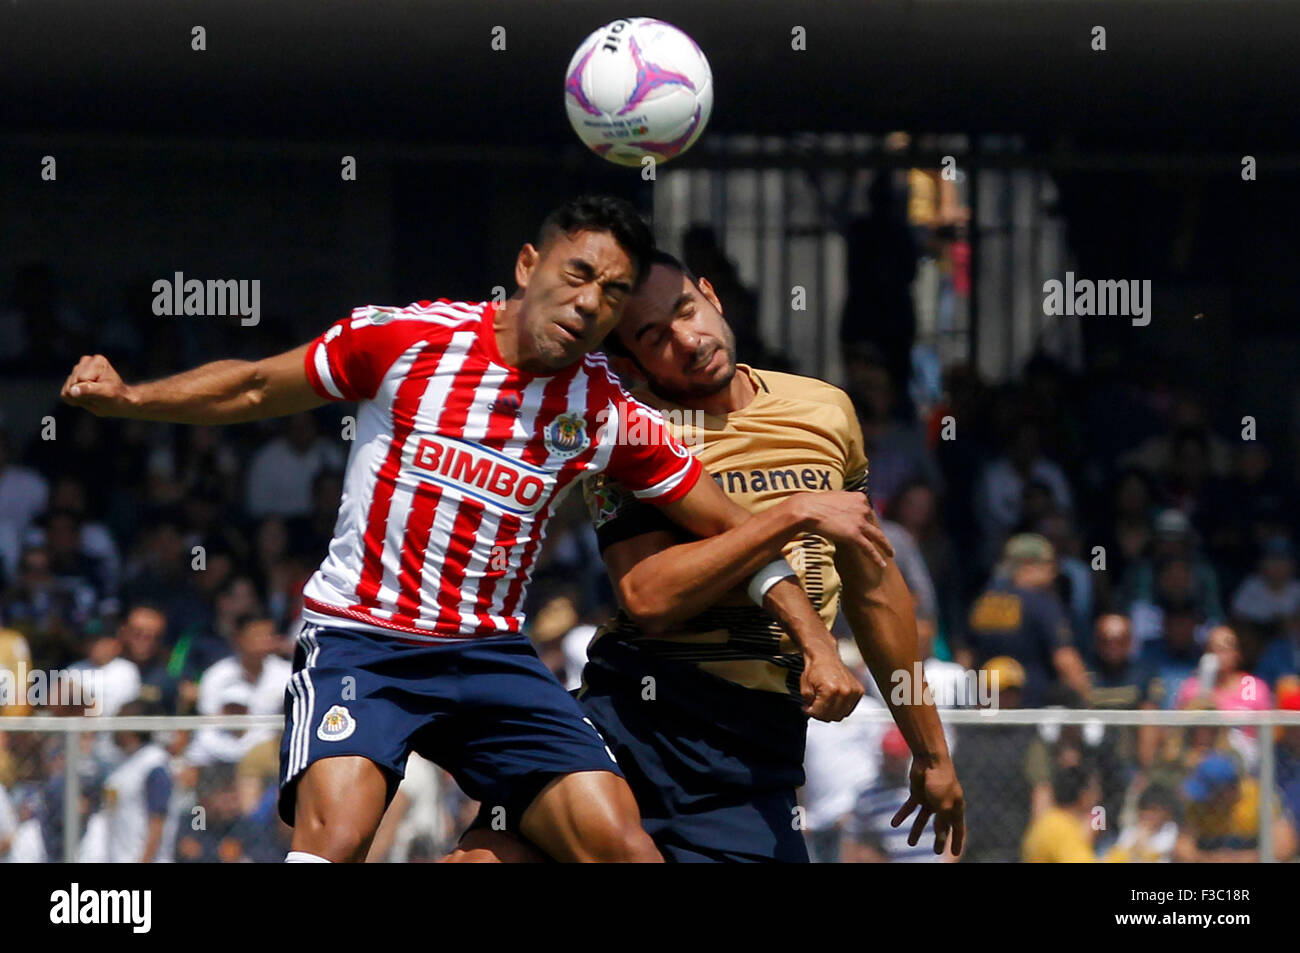 Mexico City, Mexico. 4th Oct, 2015. Pumas del UNAM's Alejandro Castro (R) vies with Chivas' Marco Fabian during the 2015 MX League match held in the University Olympic Stadium, in Mexico City, capital of Mexico, on Oct. 4, 2015. Pumas won by 1-0. © Adriana Perez/Xinhua/Alamy Live News Stock Photo